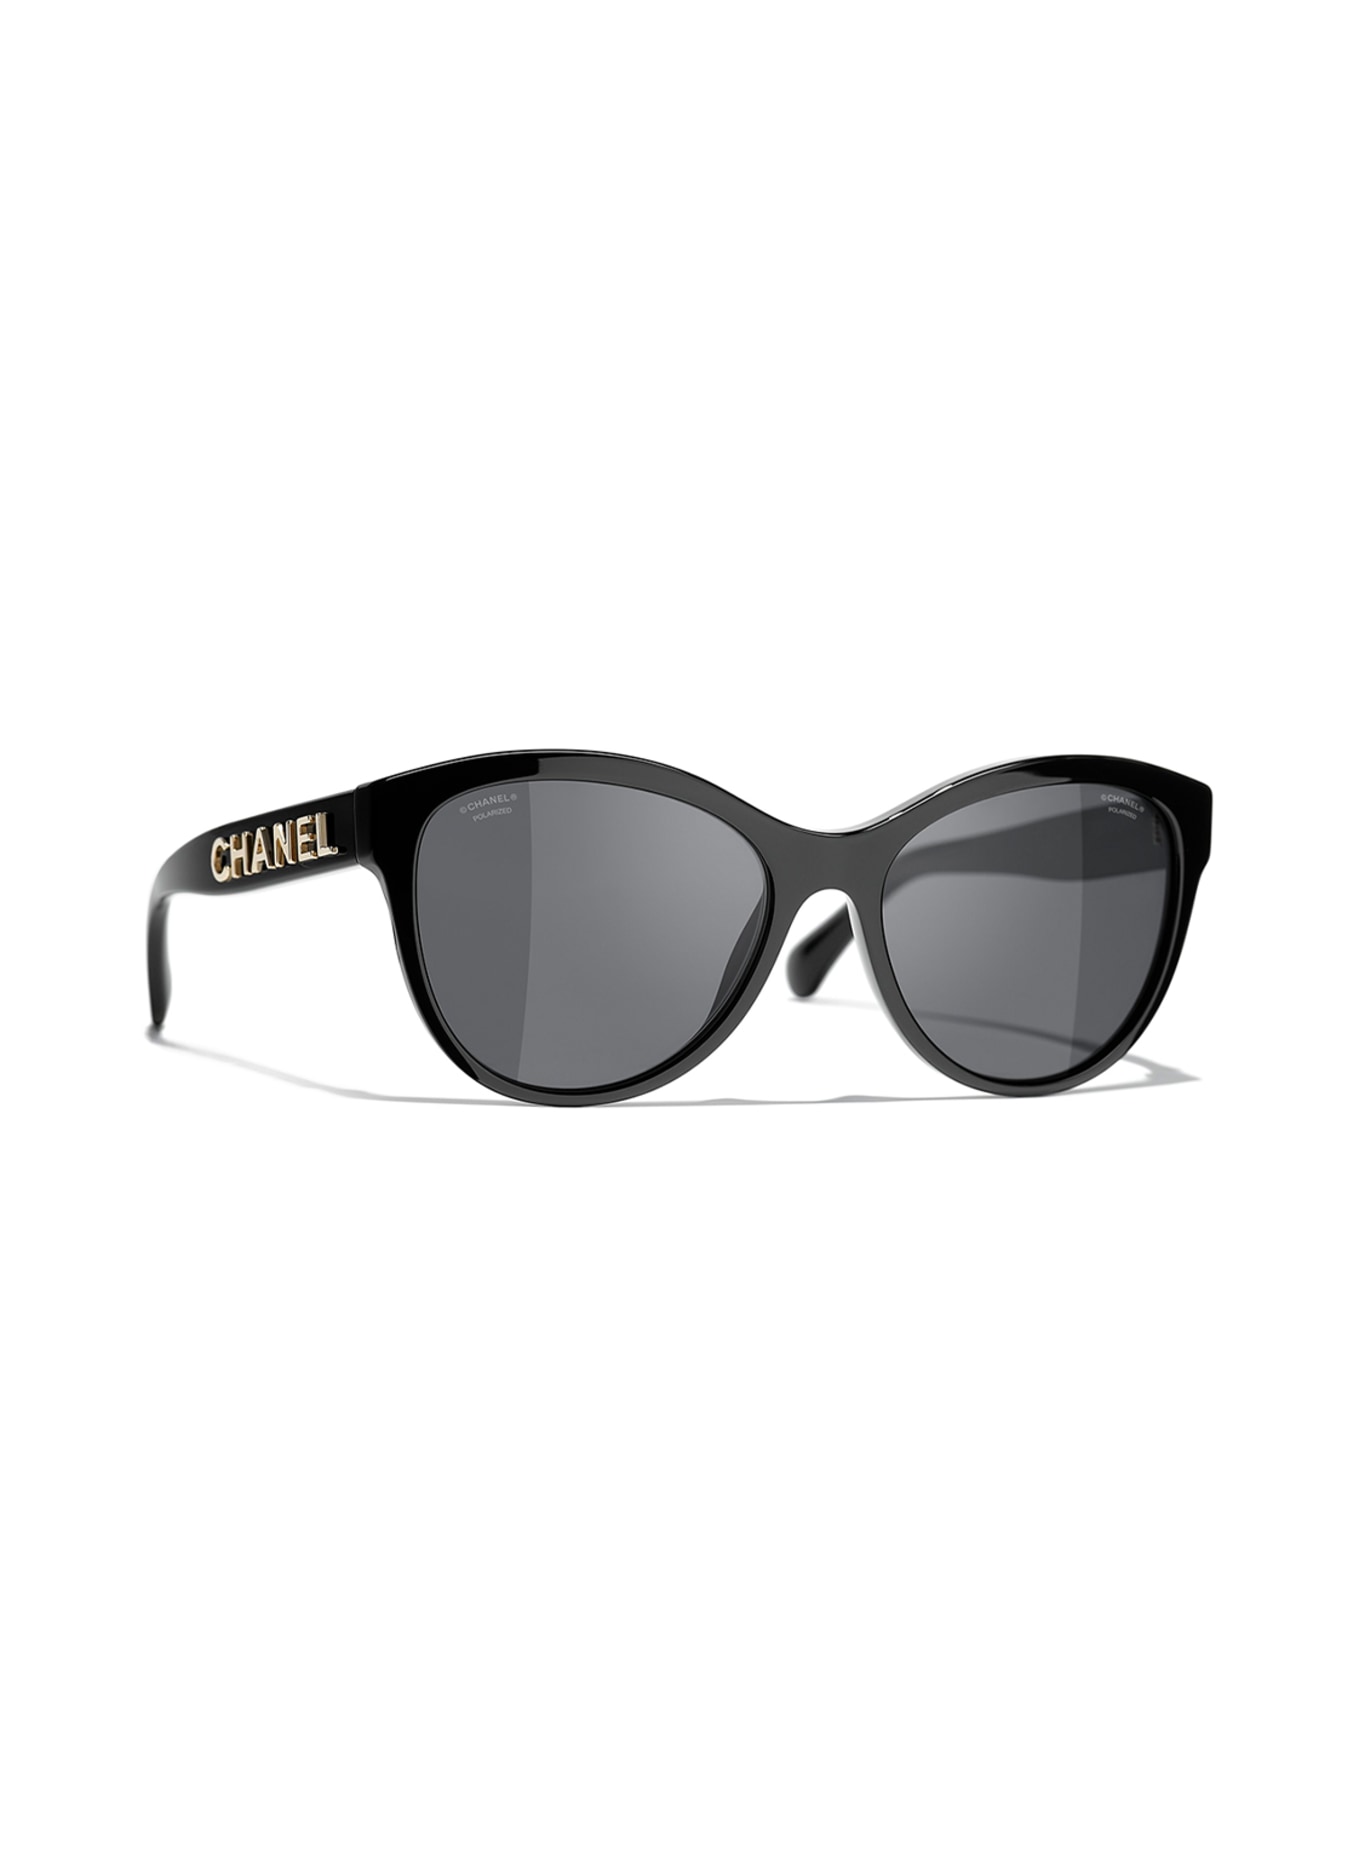 CHANEL Butterfly sunglasses, Color: C622T8 - BLACK/GRAY POLARIZED (Image 1)